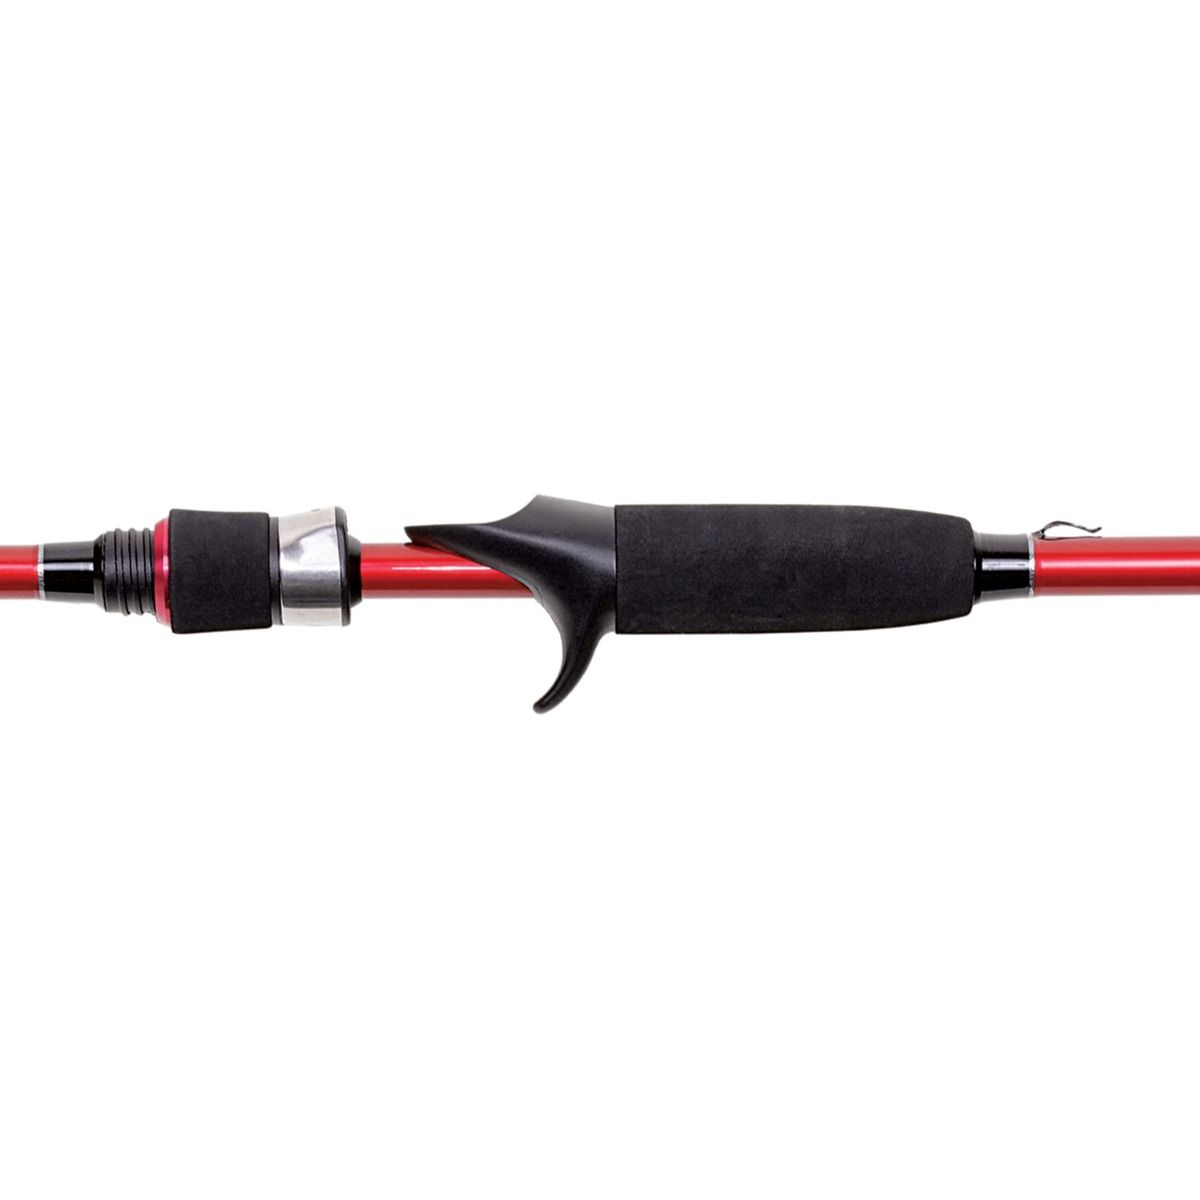 Eagle Claw EC2.5 Series Spinning Rod